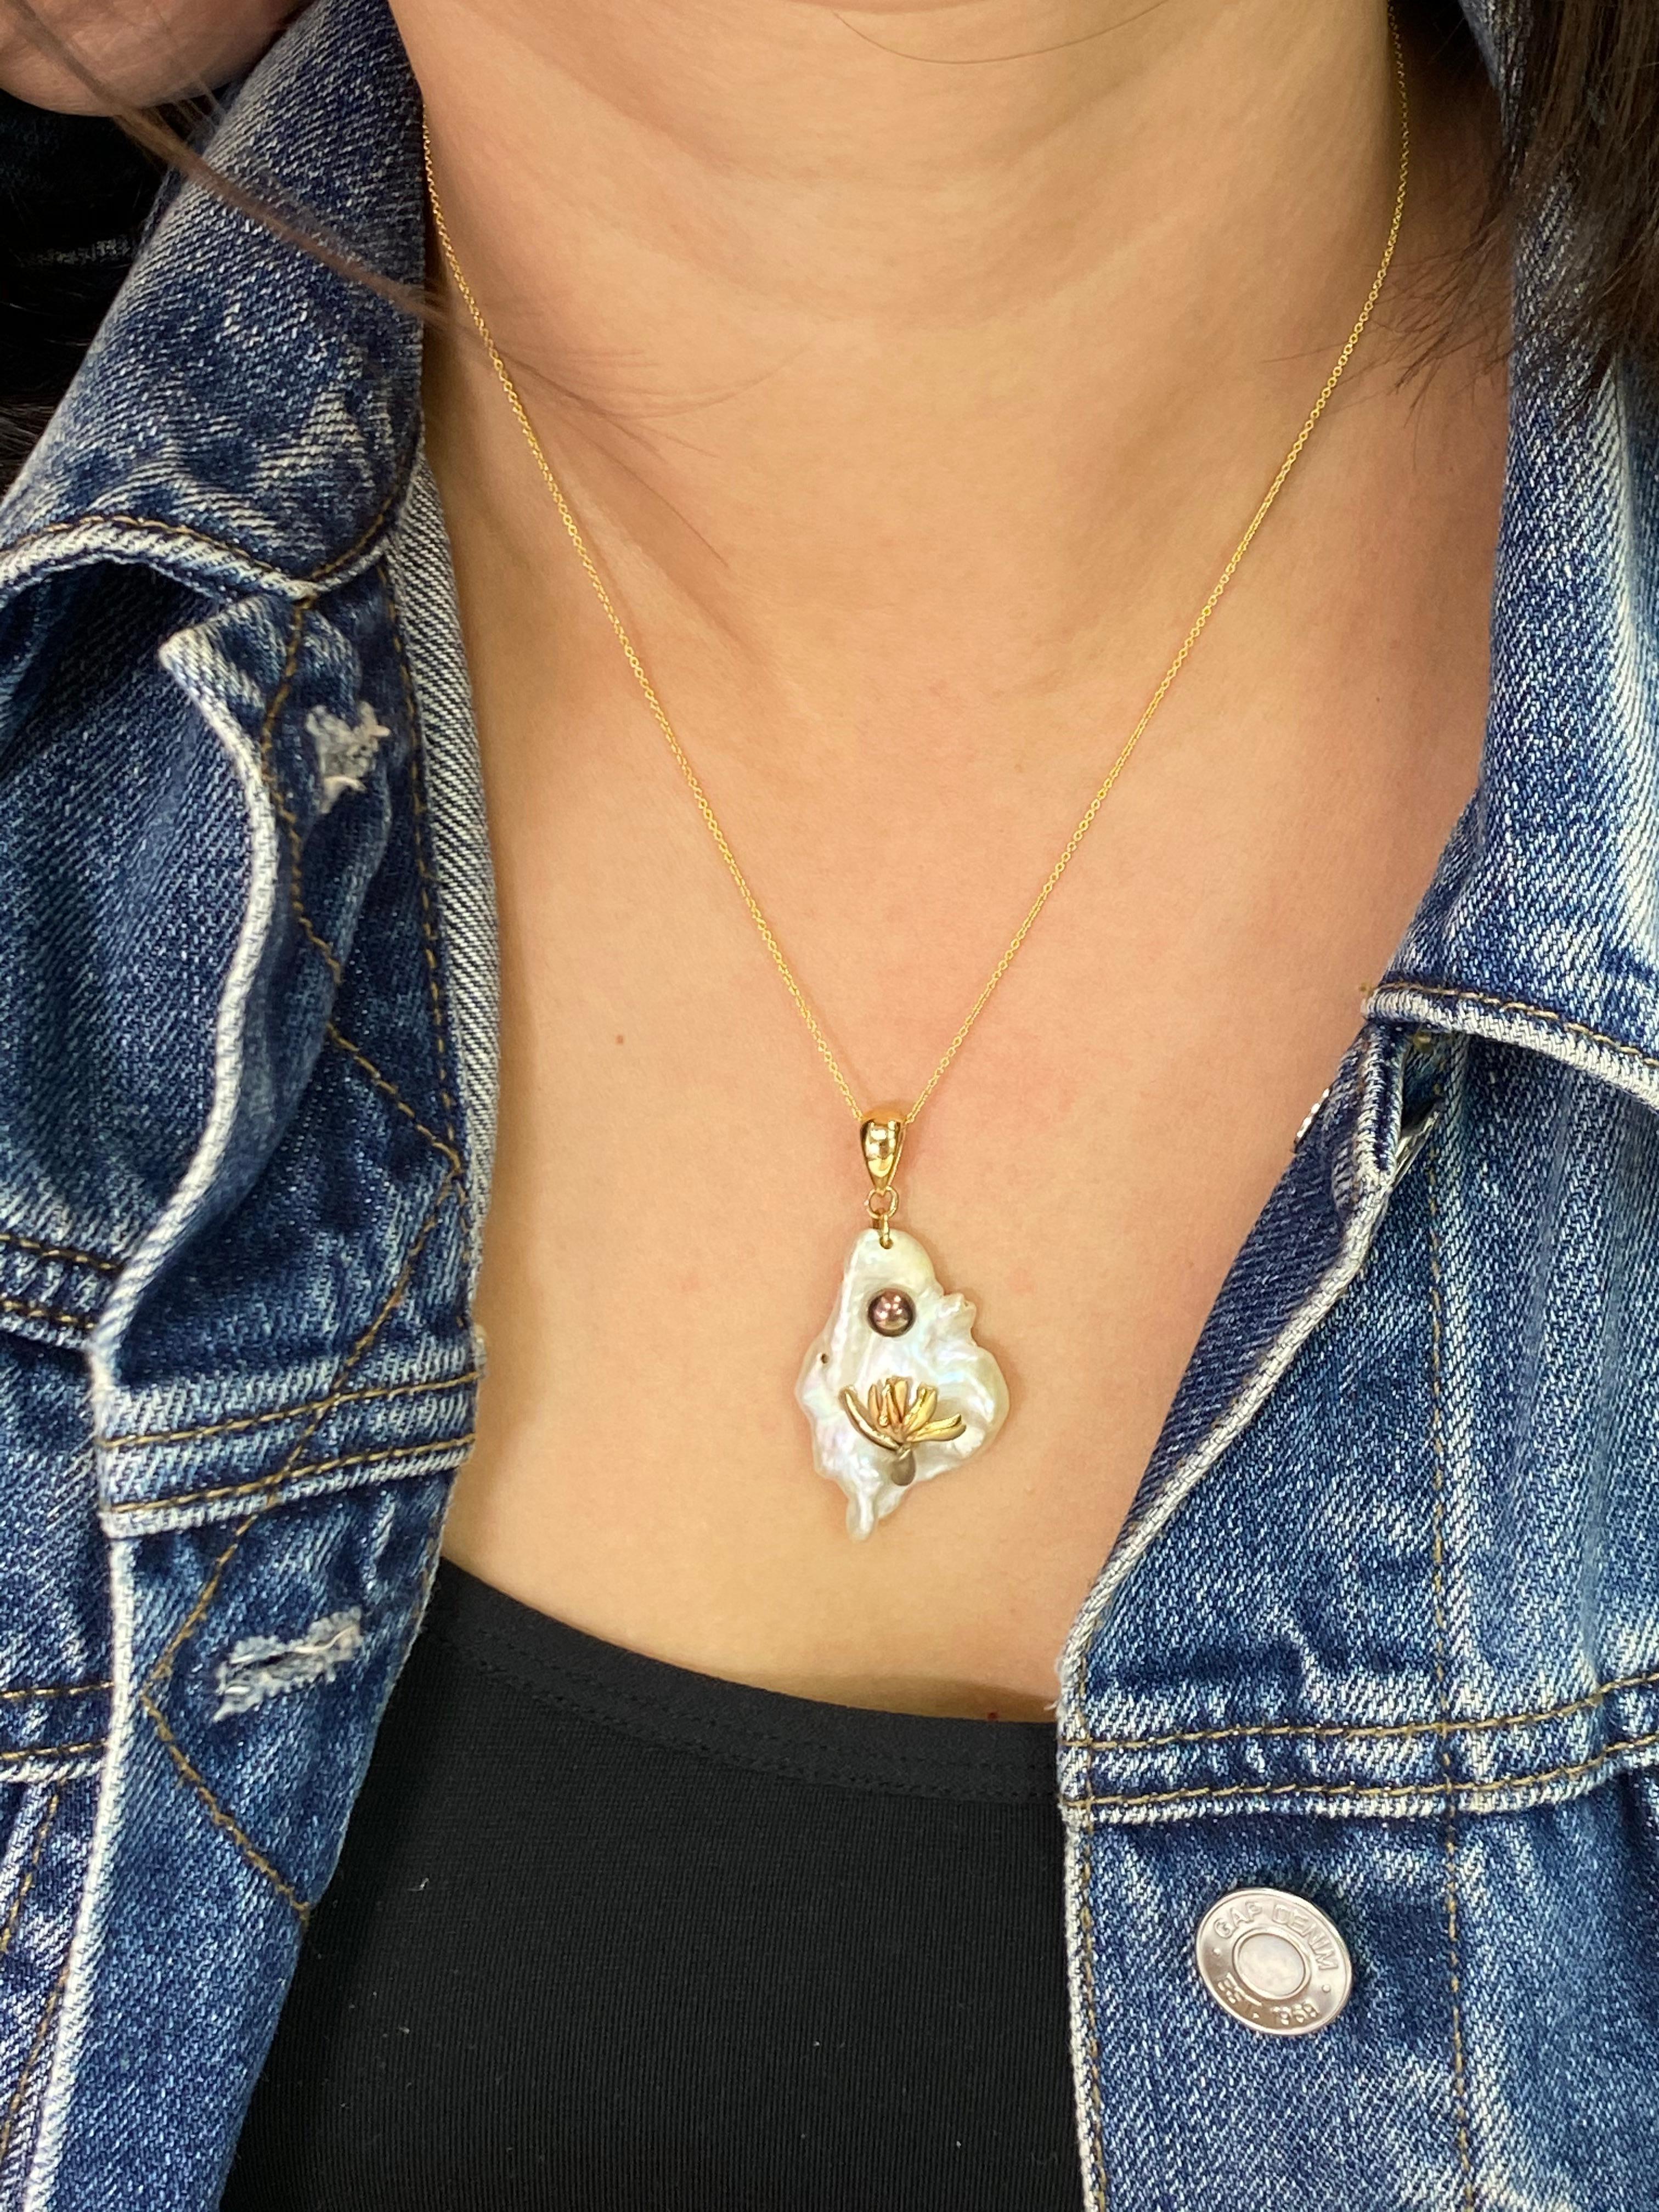 This is a super unique one of a kind pendant. This mother of pearl has a natural irregular shape with excellent luster. The pendant is set in 14k yellow gold. There is a round color changing Tahitian black pearl along with 14k yellow gold 